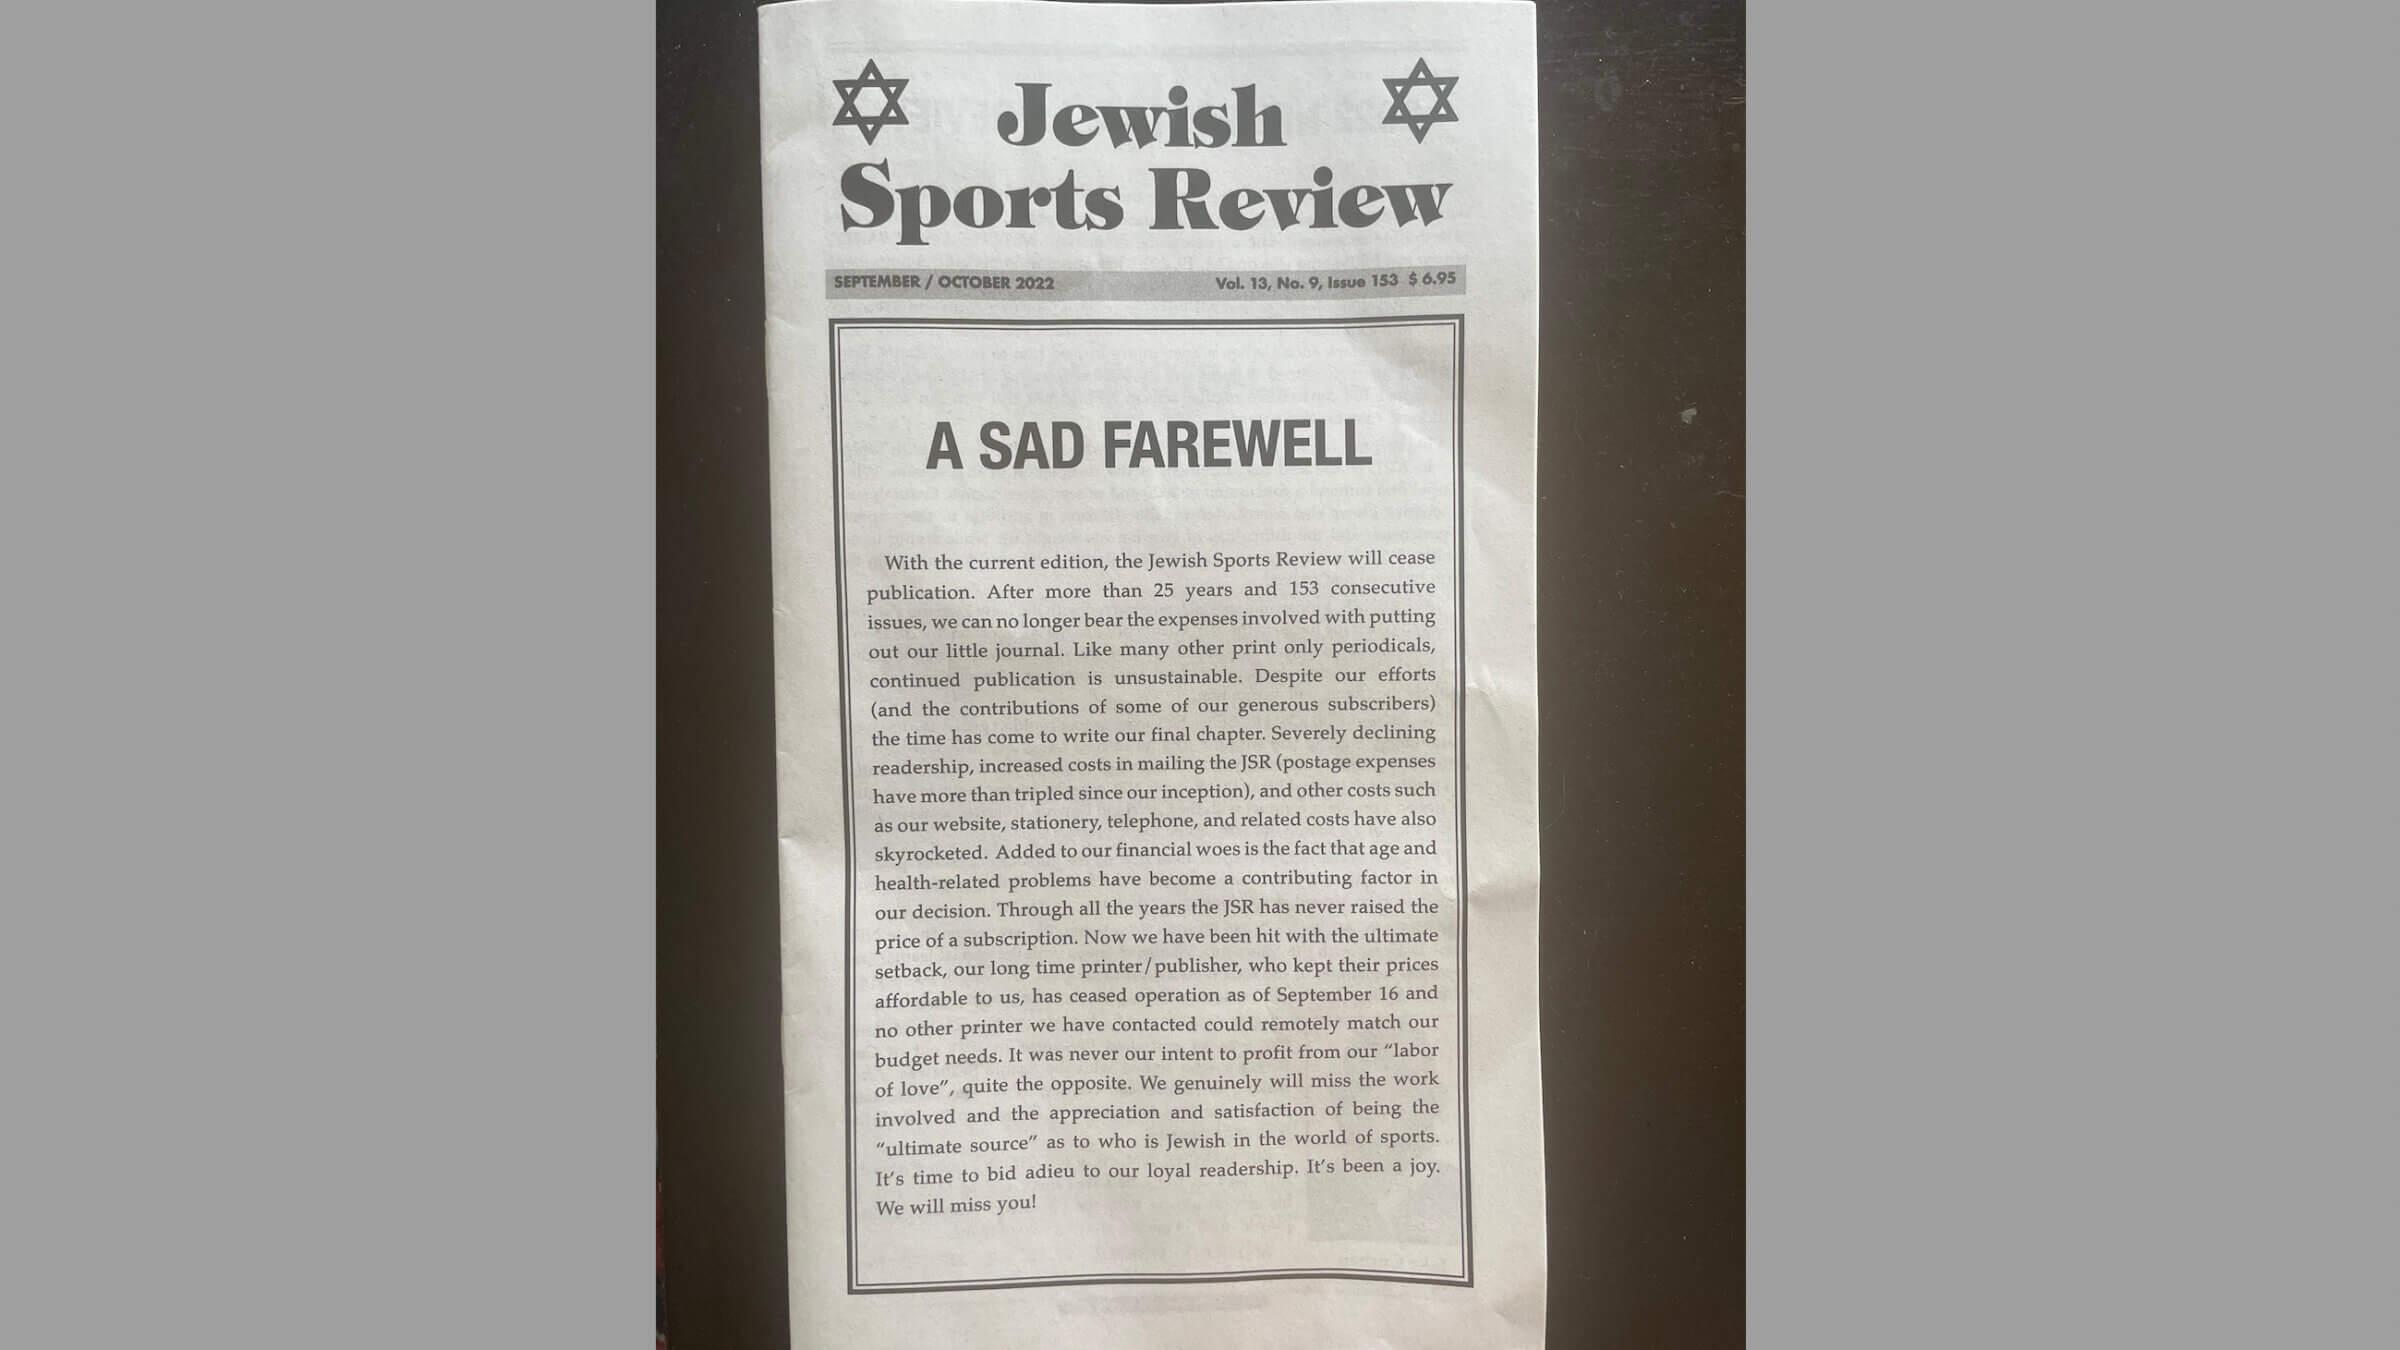 The final edition of the Jewish Sports Review was mailed to readers last month.